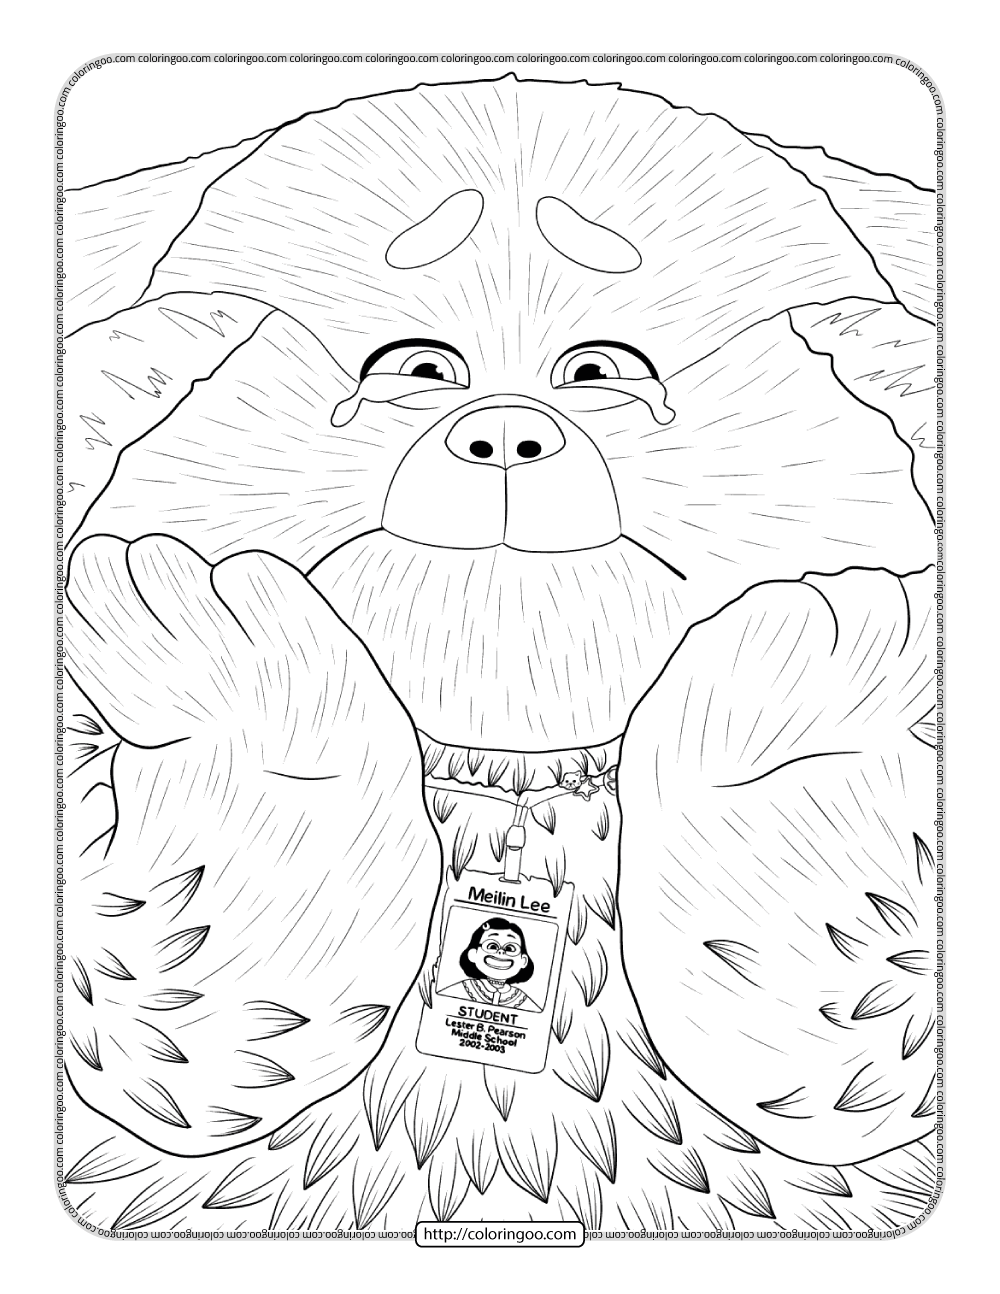 turning red crying panda coloring pages